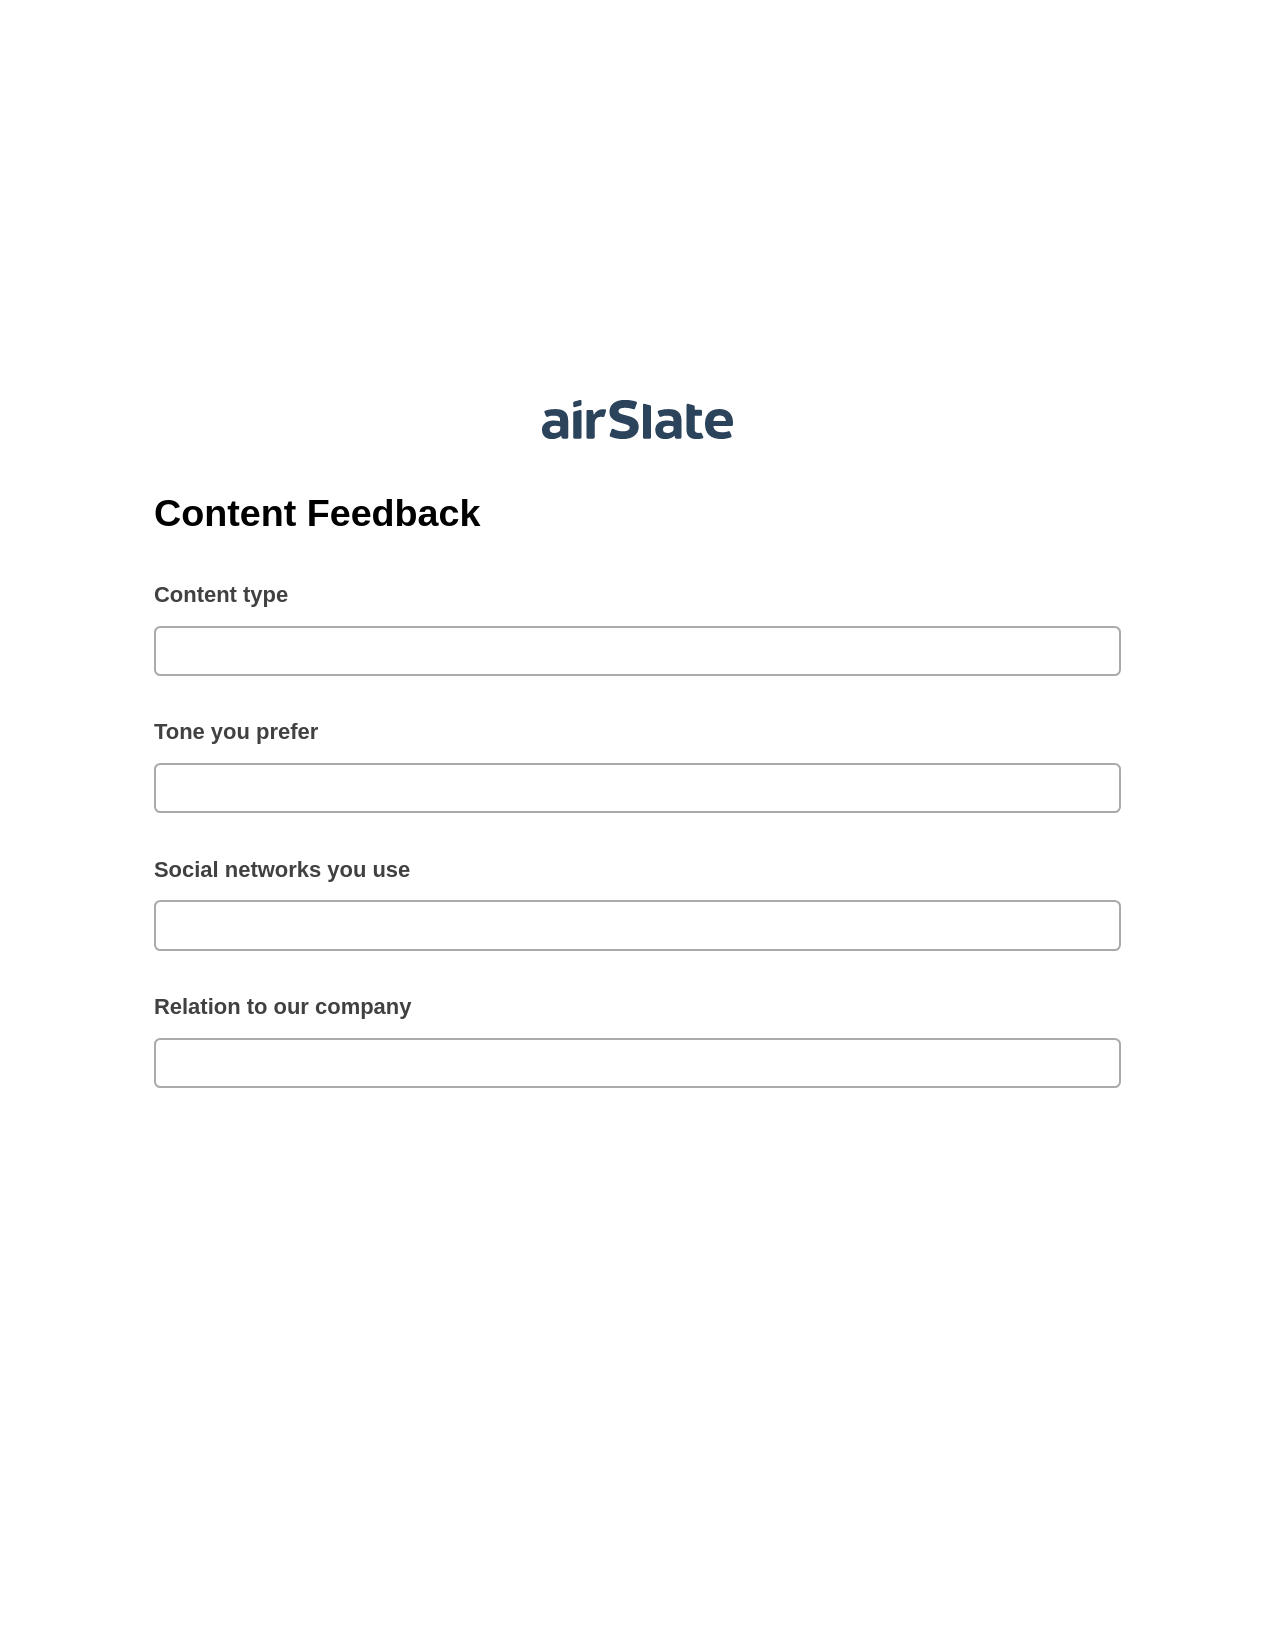 Multirole Content Feedback Pre-fill Slate from MS Dynamics 365 Records Bot, Jira Bot, Archive to SharePoint Folder Bot